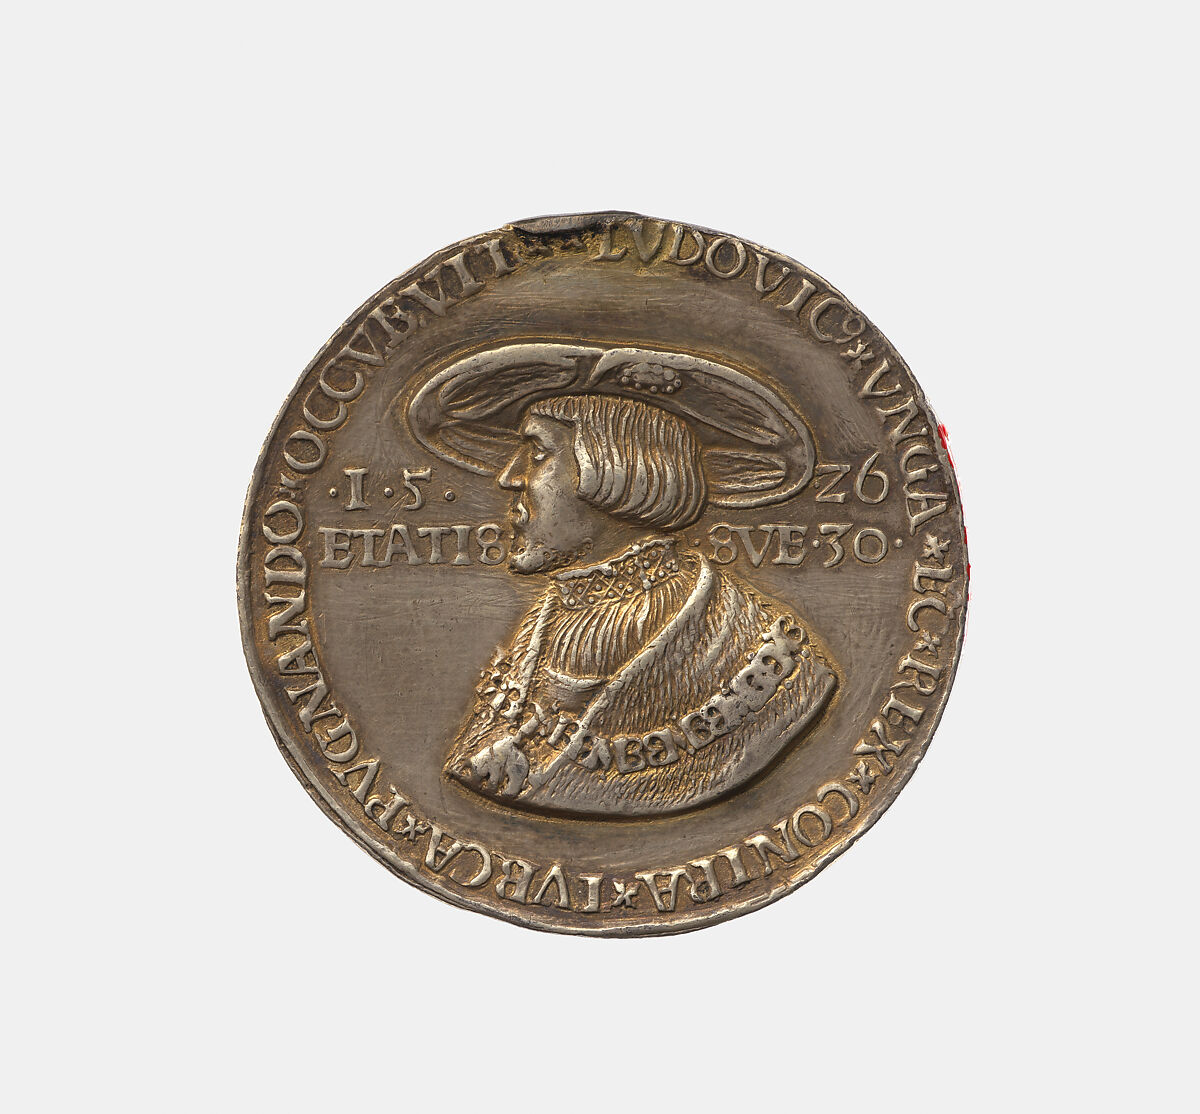 Louis II 1506-26, King of Hungary 1516-26, and his wife Maria, sister of Charles V, Michael Hohenauer (active 1530–ca. 1558), Silver, old fire-gilding, German or Austrian 